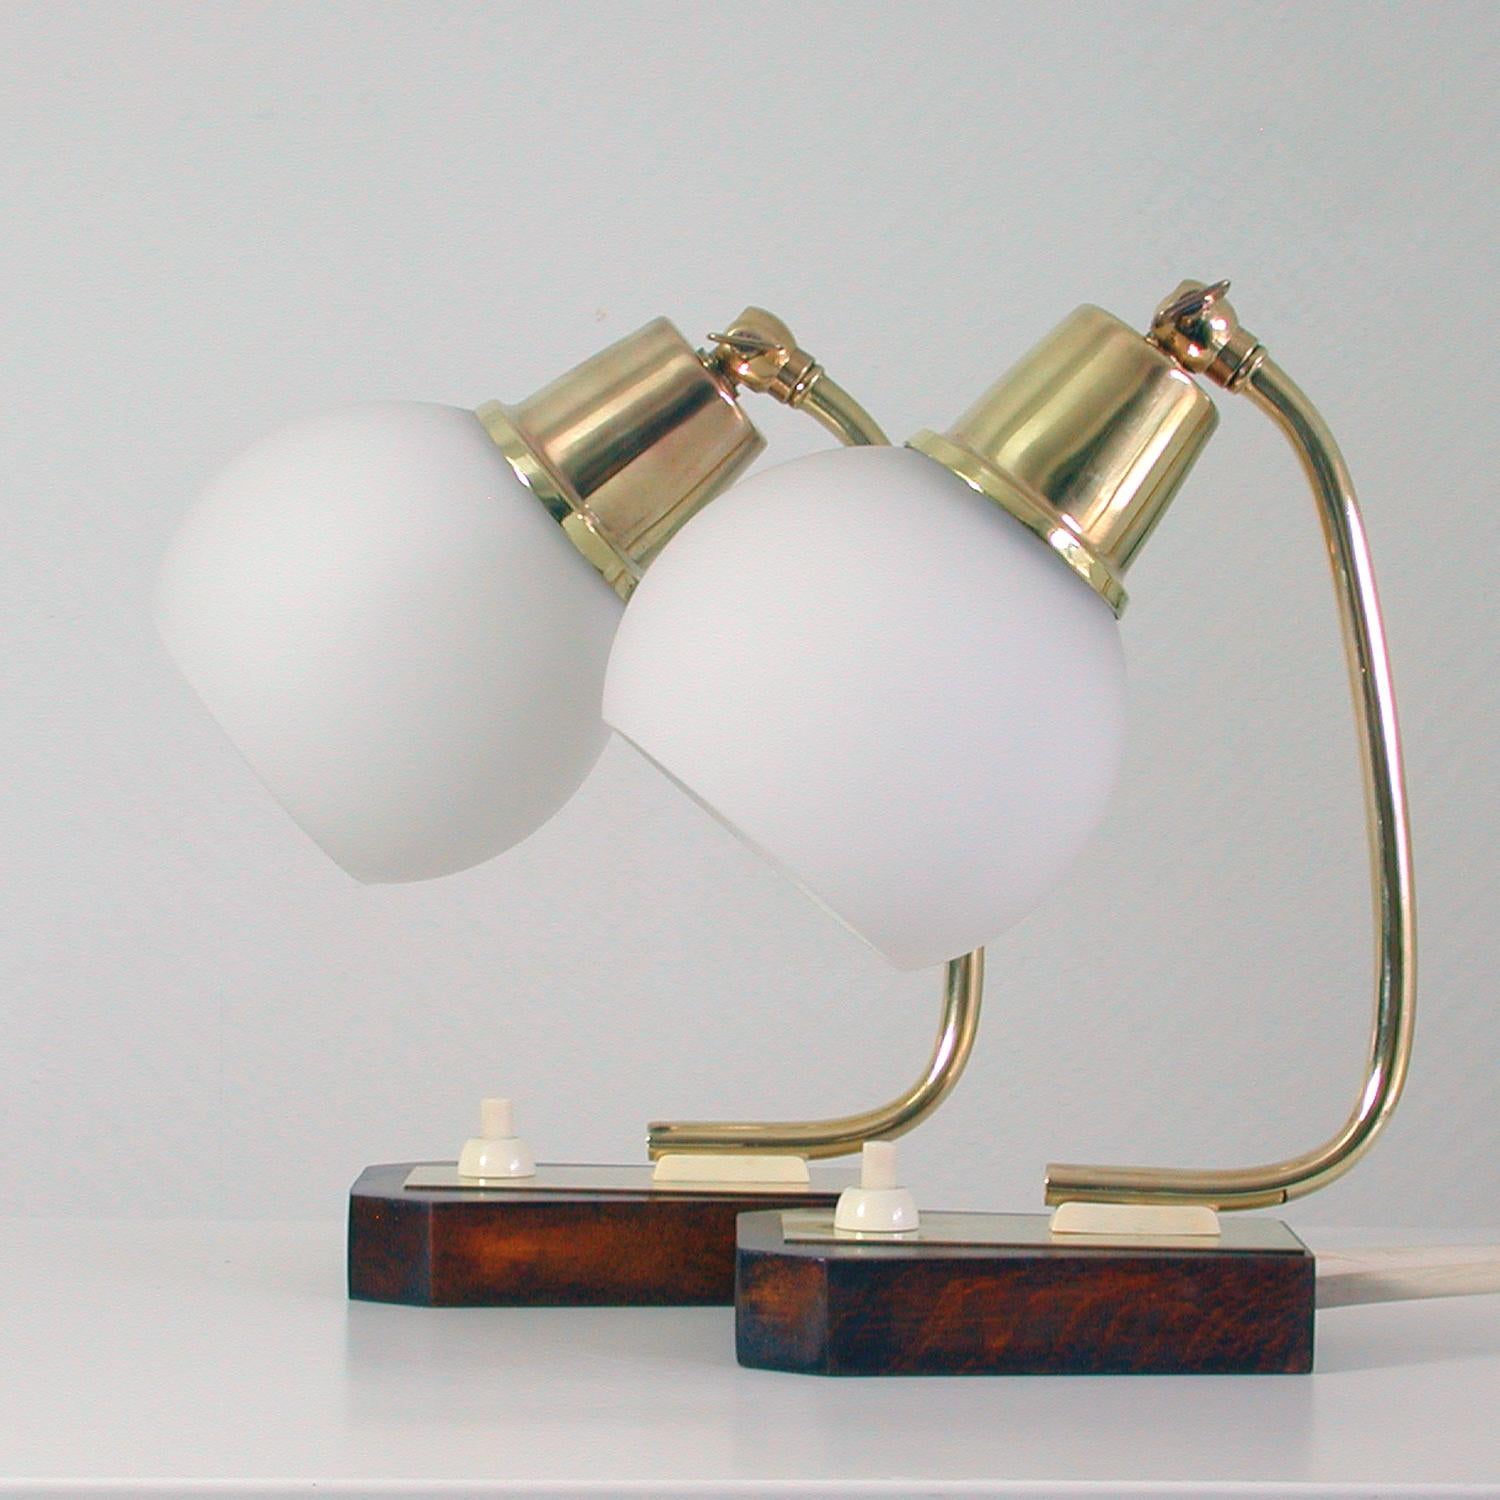 These vintage midcentury table lamps were made in Denmark in the late 1950s. They are made of brass, have got wooden (teak?) bases and adjustable opal glass lamp shades.